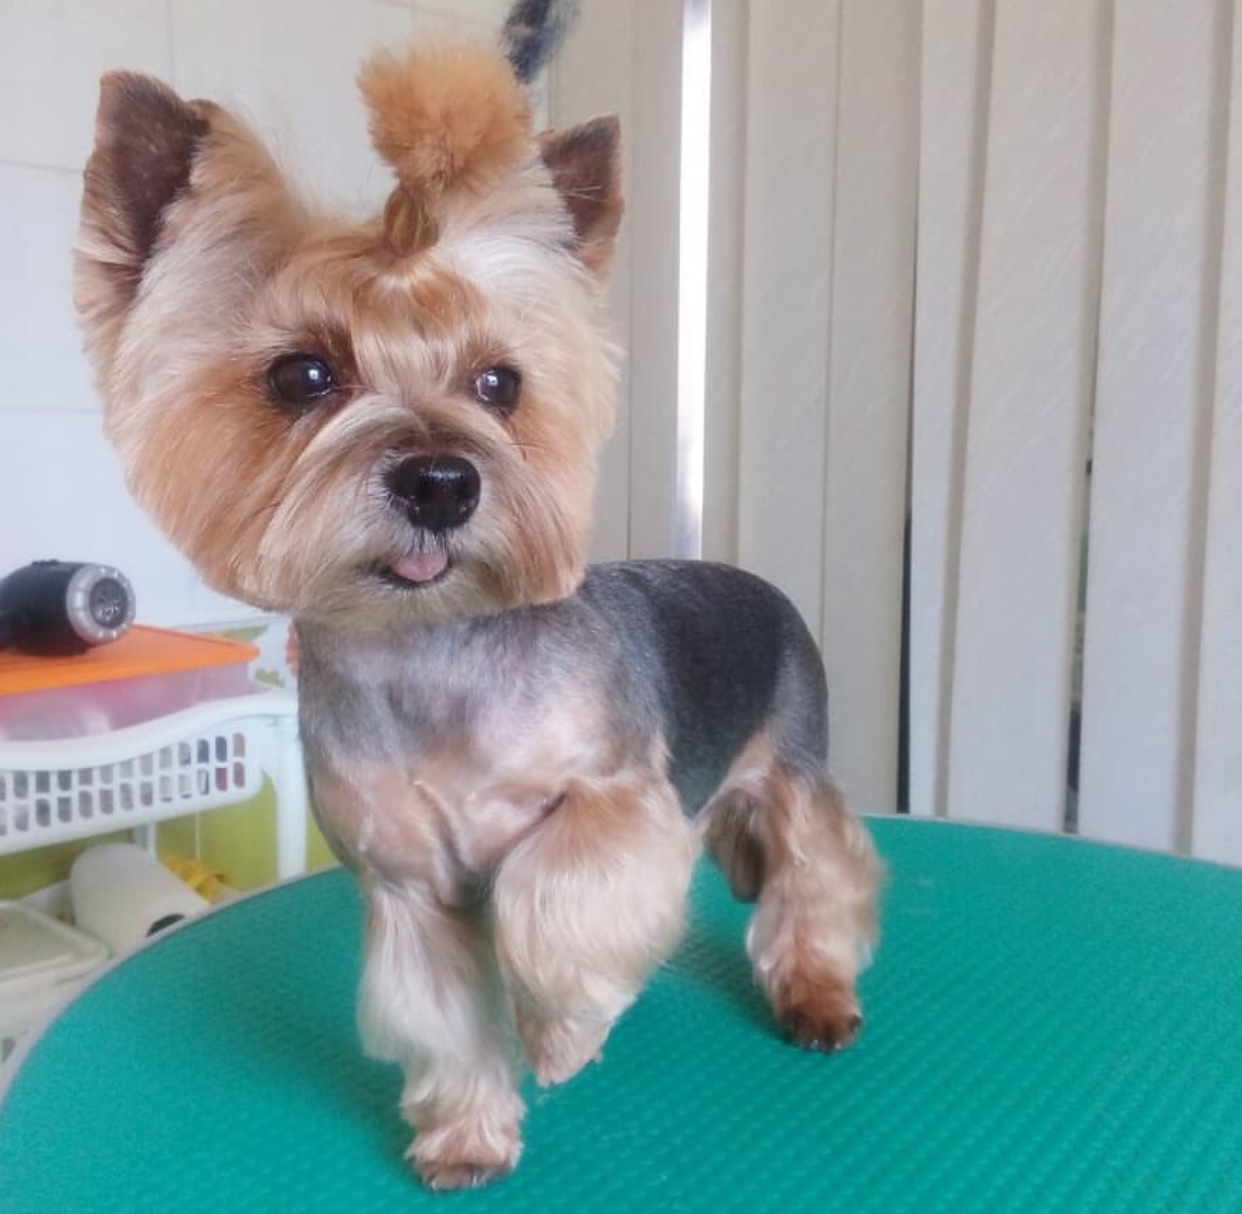 A Yorkshire Terrier in summer haircut while standing on top of the grooming table